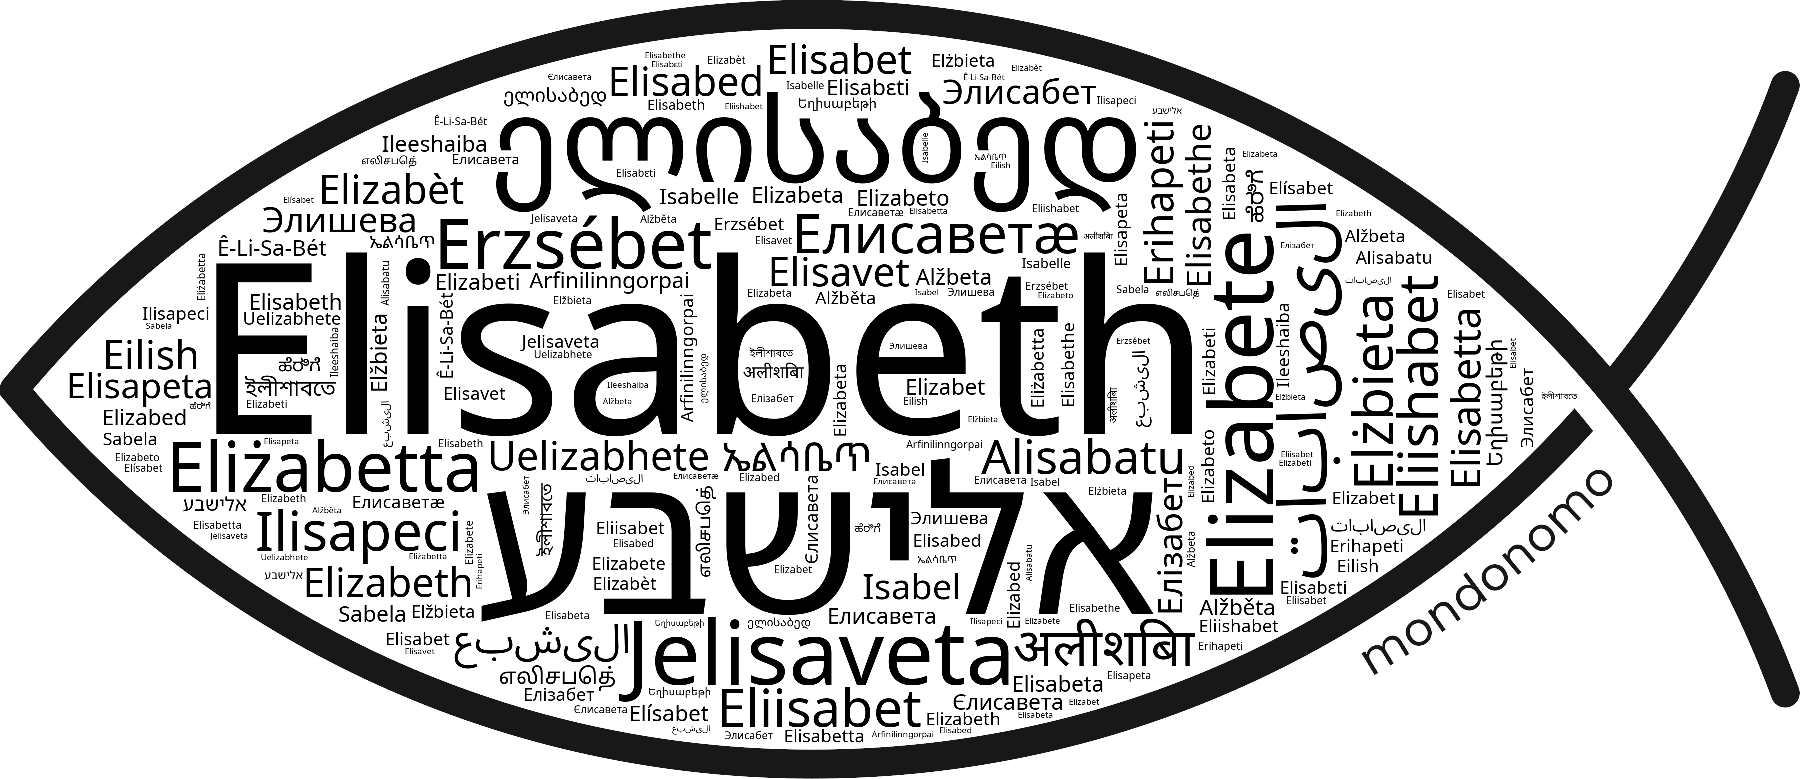 Name Elisabeth in the world's Bibles